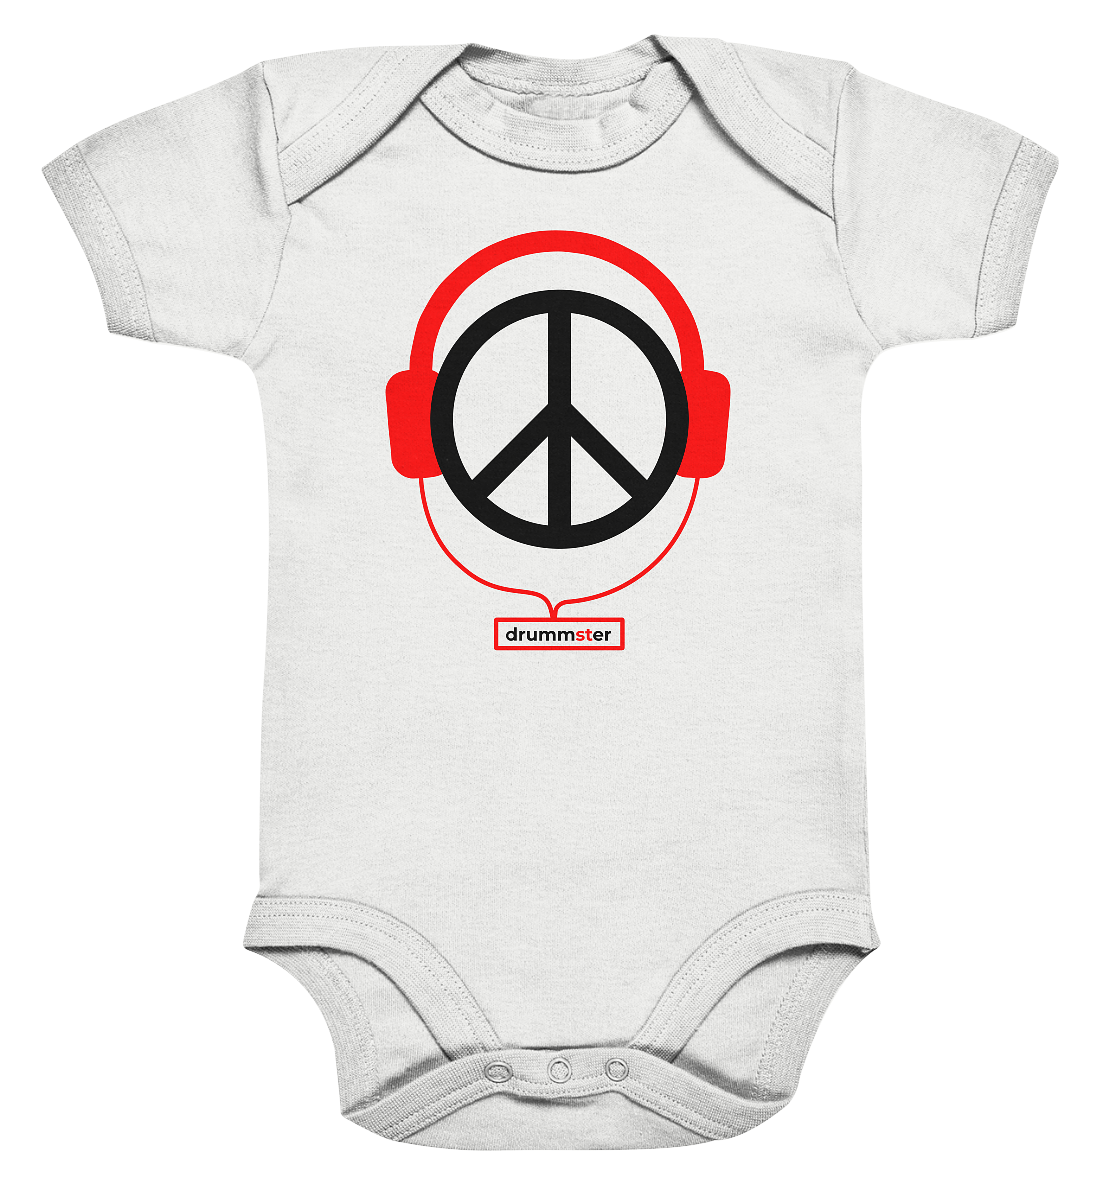 sound of peace - baby bodysuite | various colors